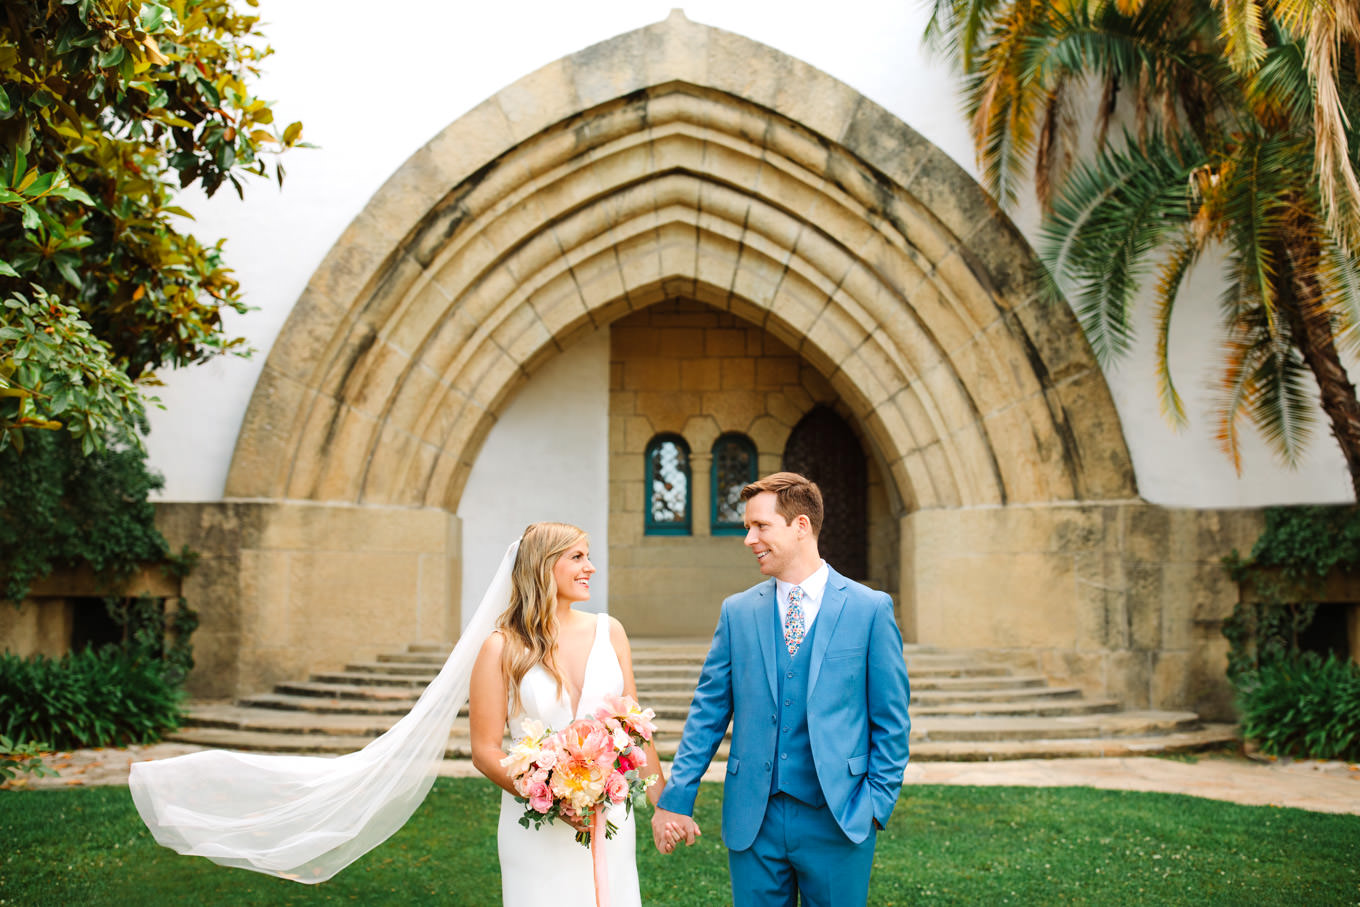 Santa Barbara Courthouse elopement | Engagement, elopement, and wedding photography roundup of Mary Costa’s favorite images from 2020 | Colorful and elevated photography for fun-loving couples in Southern California | #2020wedding #elopement #weddingphoto #weddingphotography   Source: Mary Costa Photography | Los Angeles